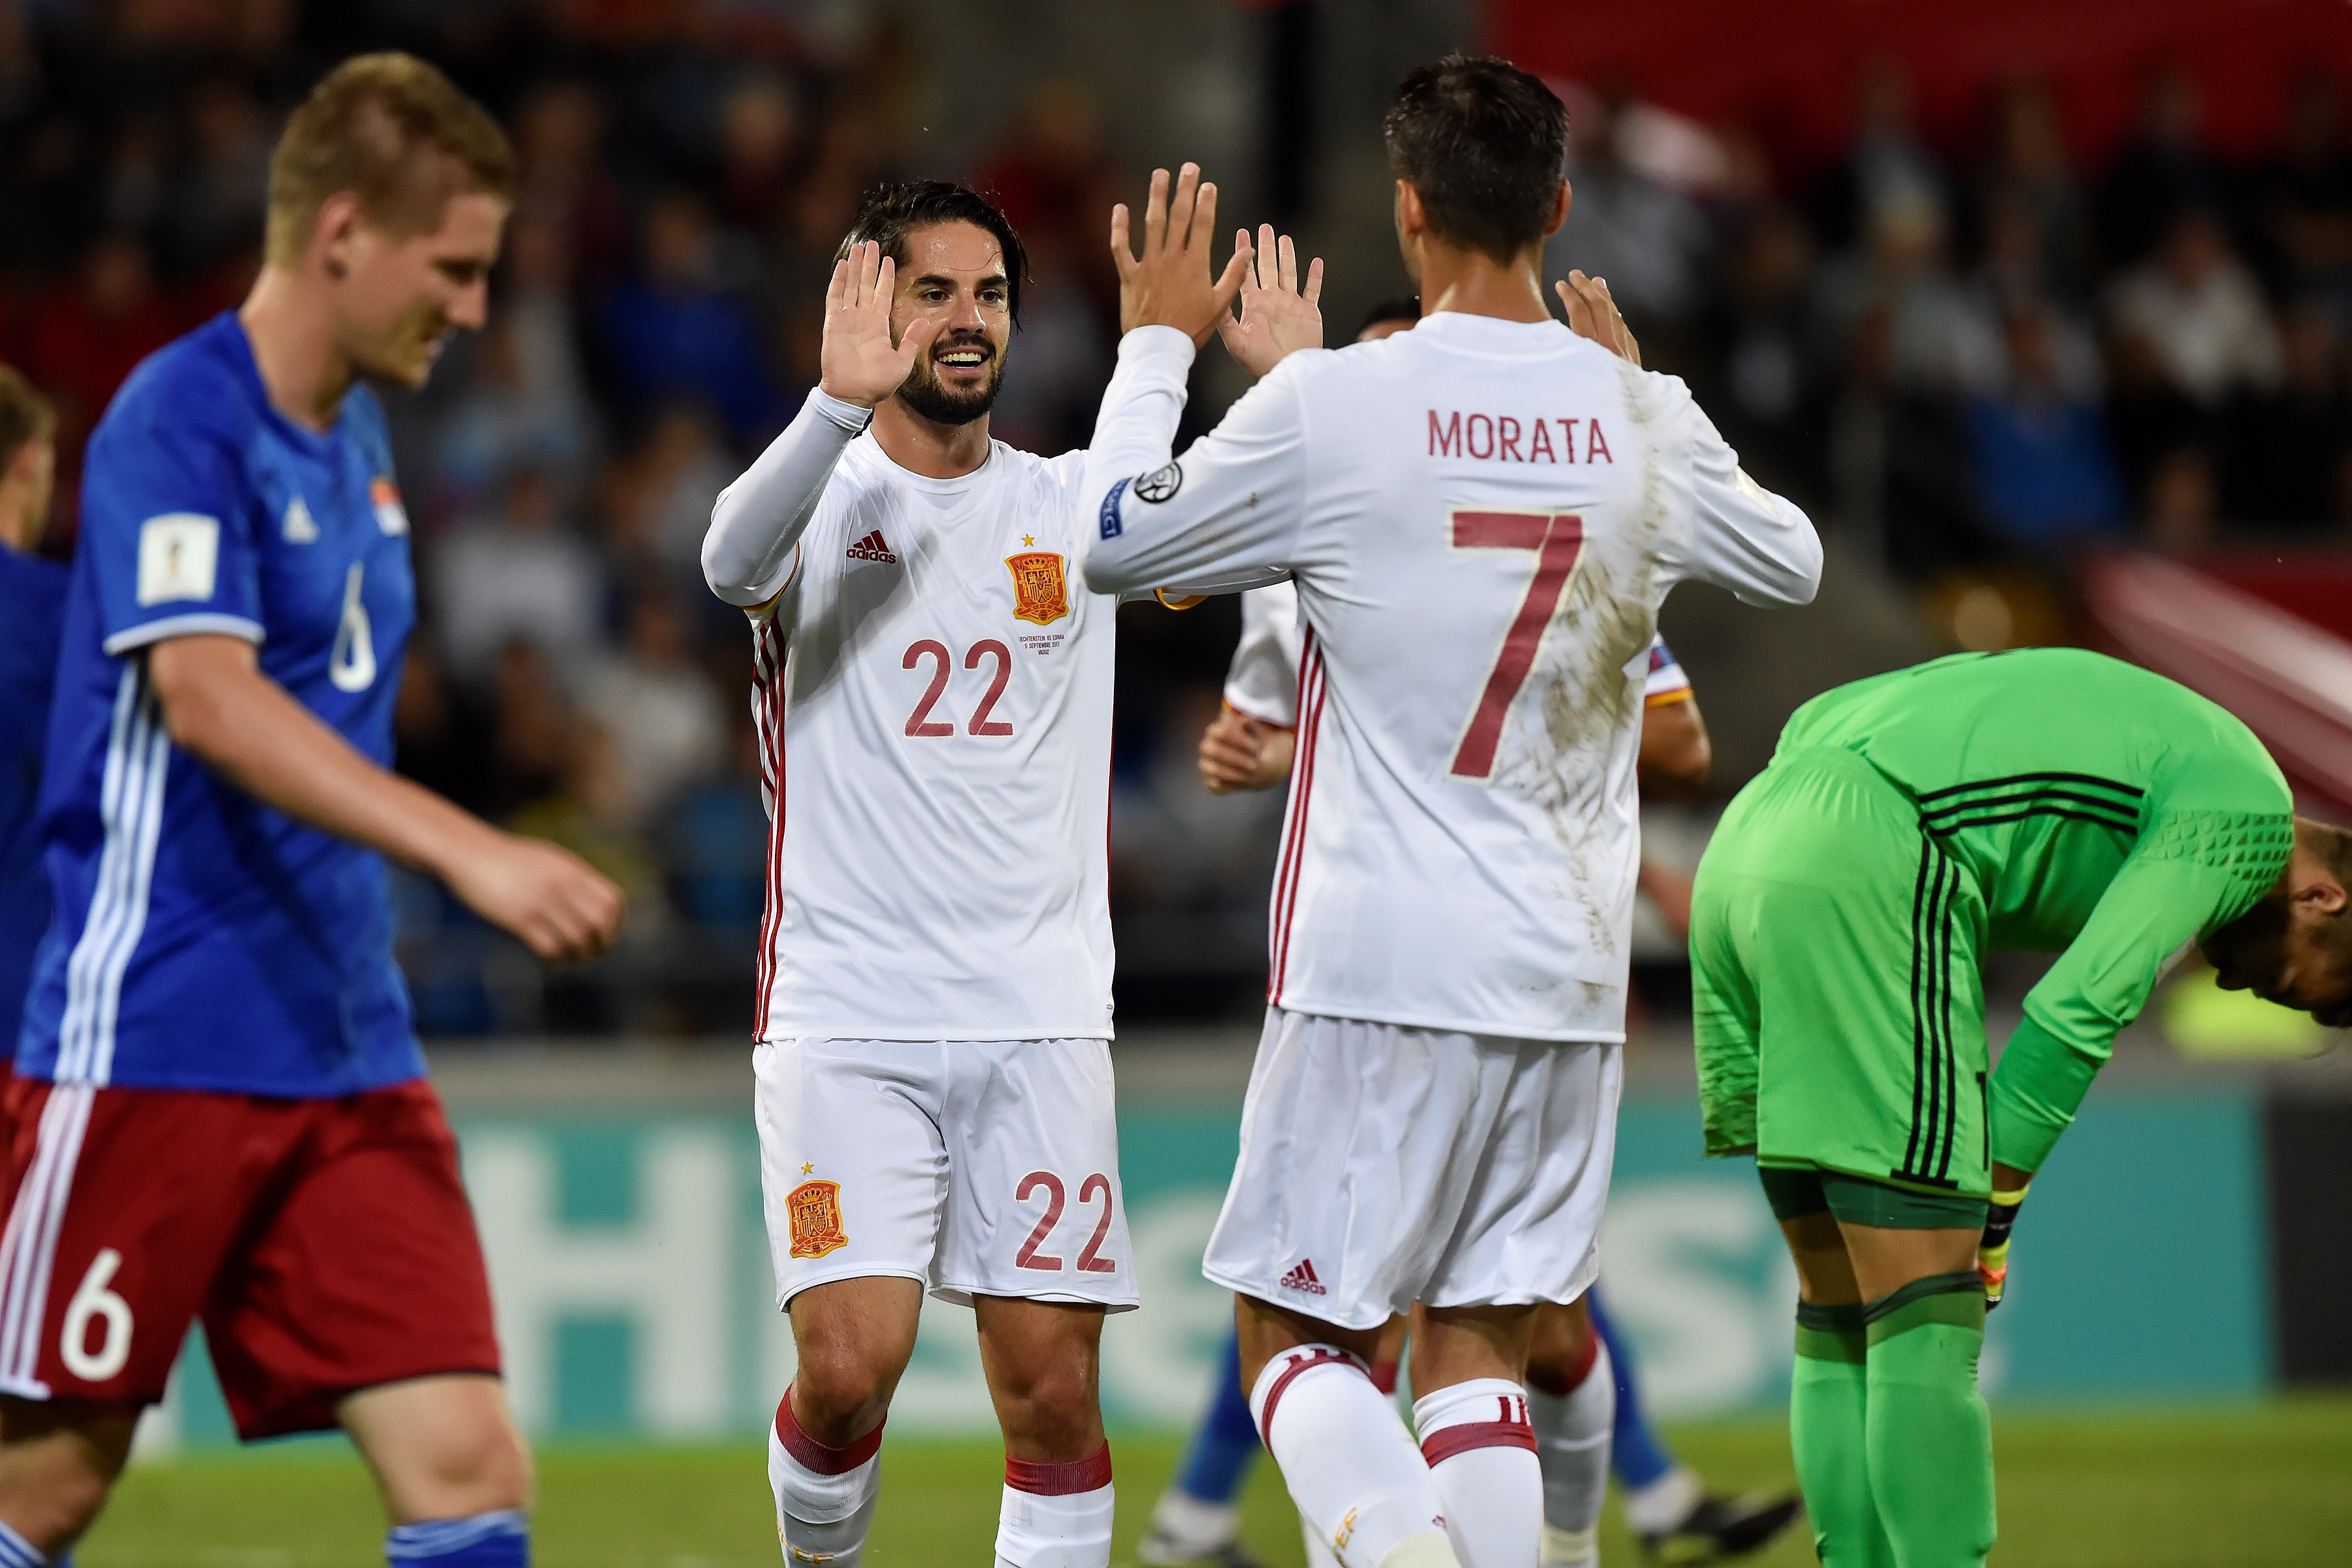 Spain's Isco ((C)) celebrates with teammate  Alvaro Morata (2nd R) after scoring a goal during the FIFA World Cup 2018 qualification football match between Liechtenstein and Spain on September 5, 2017 in Vaduz. / AFP PHOTO / Michael Buholzer        (Photo credit should read MICHAEL BUHOLZER/AFP/Getty Images)